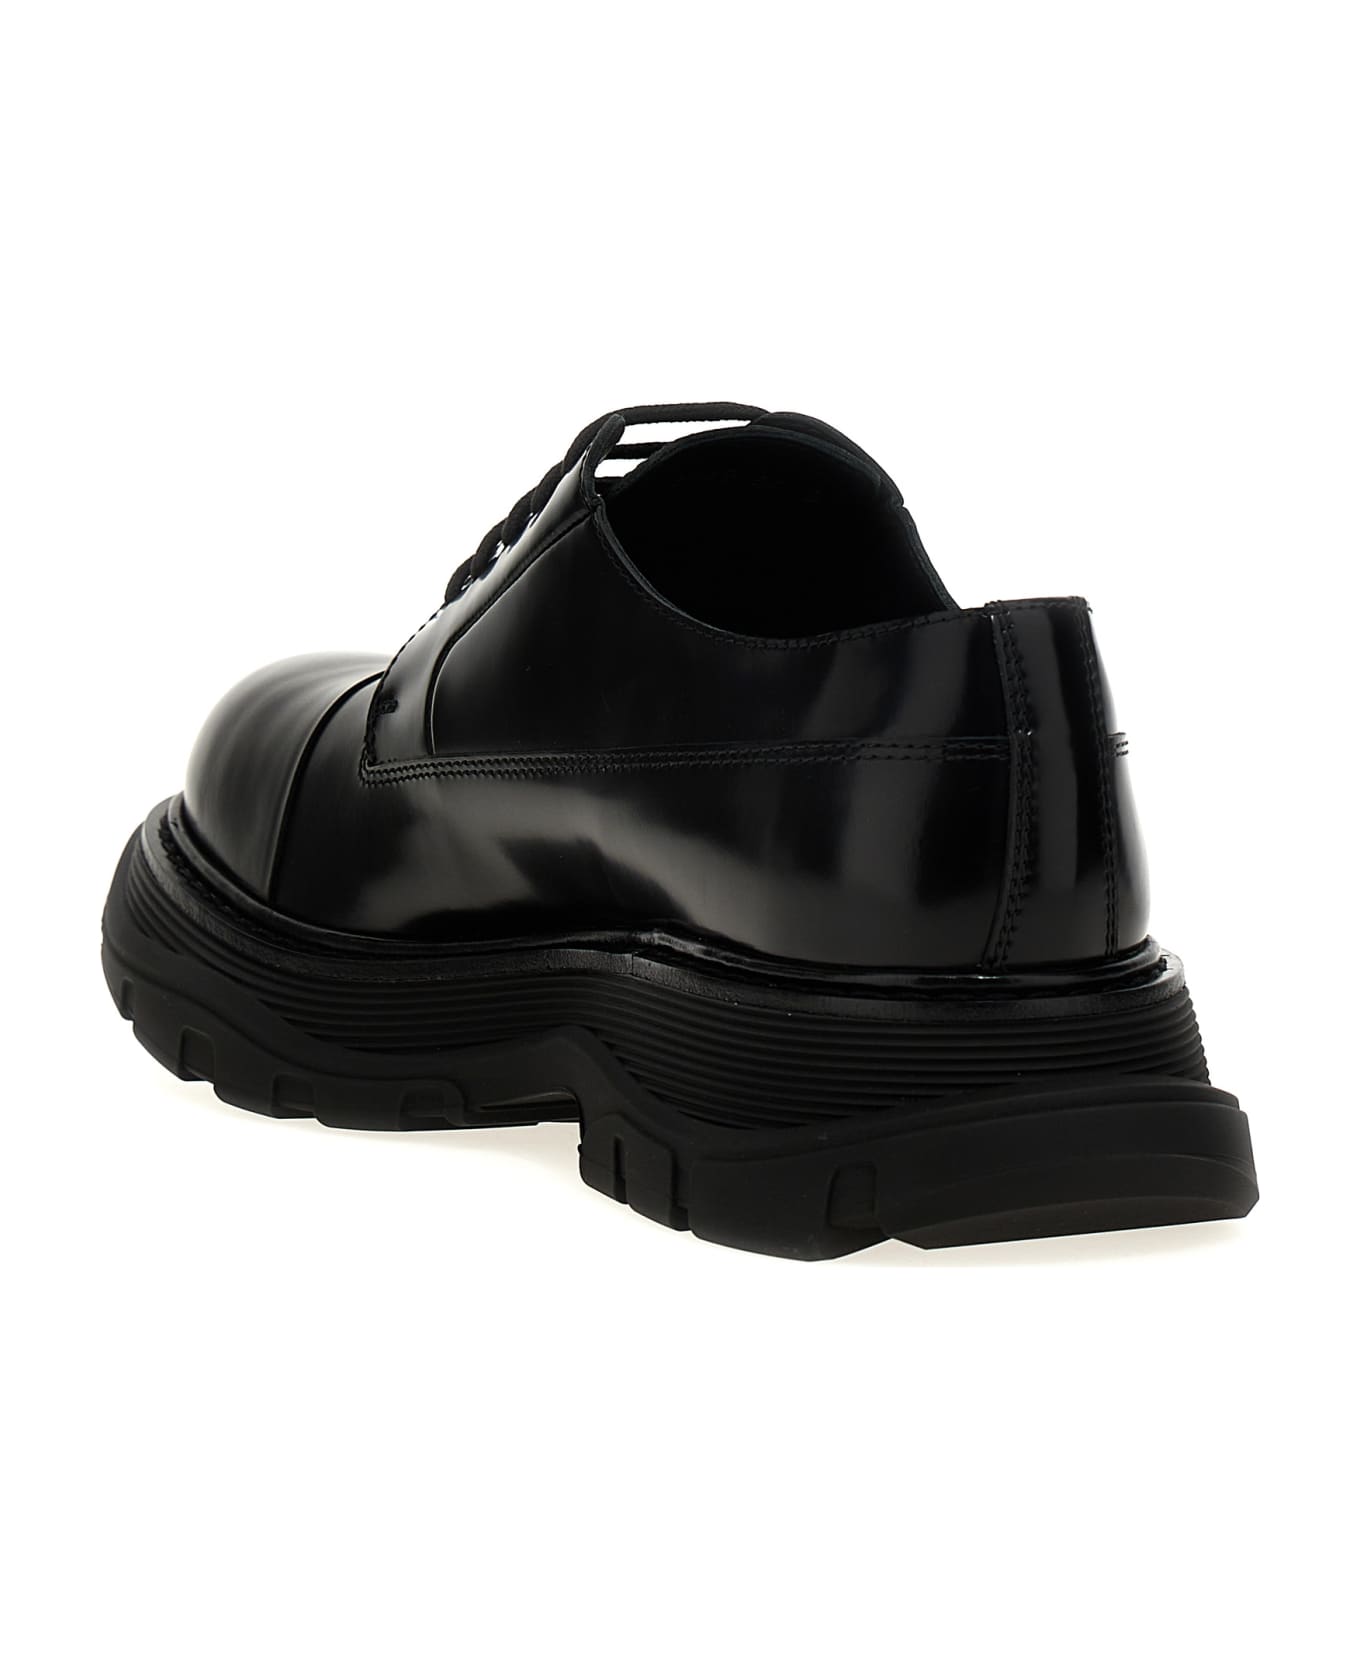 Alexander McQueen Leather Lace-up Shoes - Black  